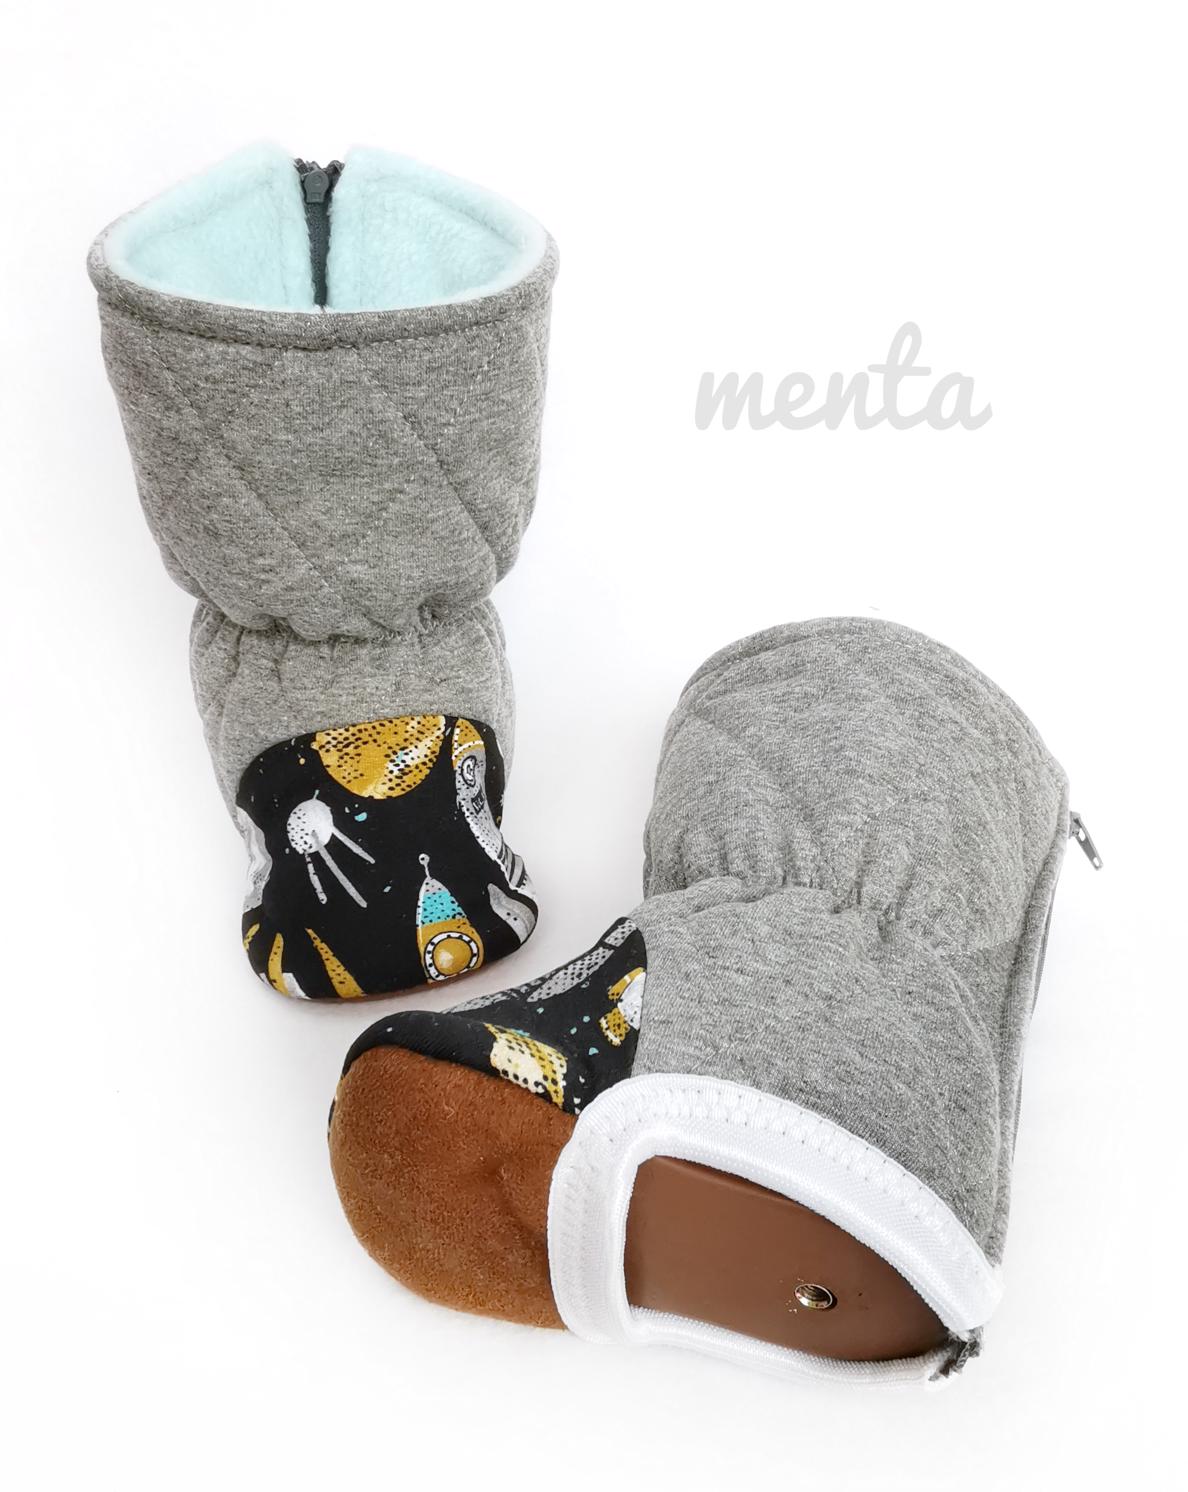 Overall Menta Booties Adaptive Add-on